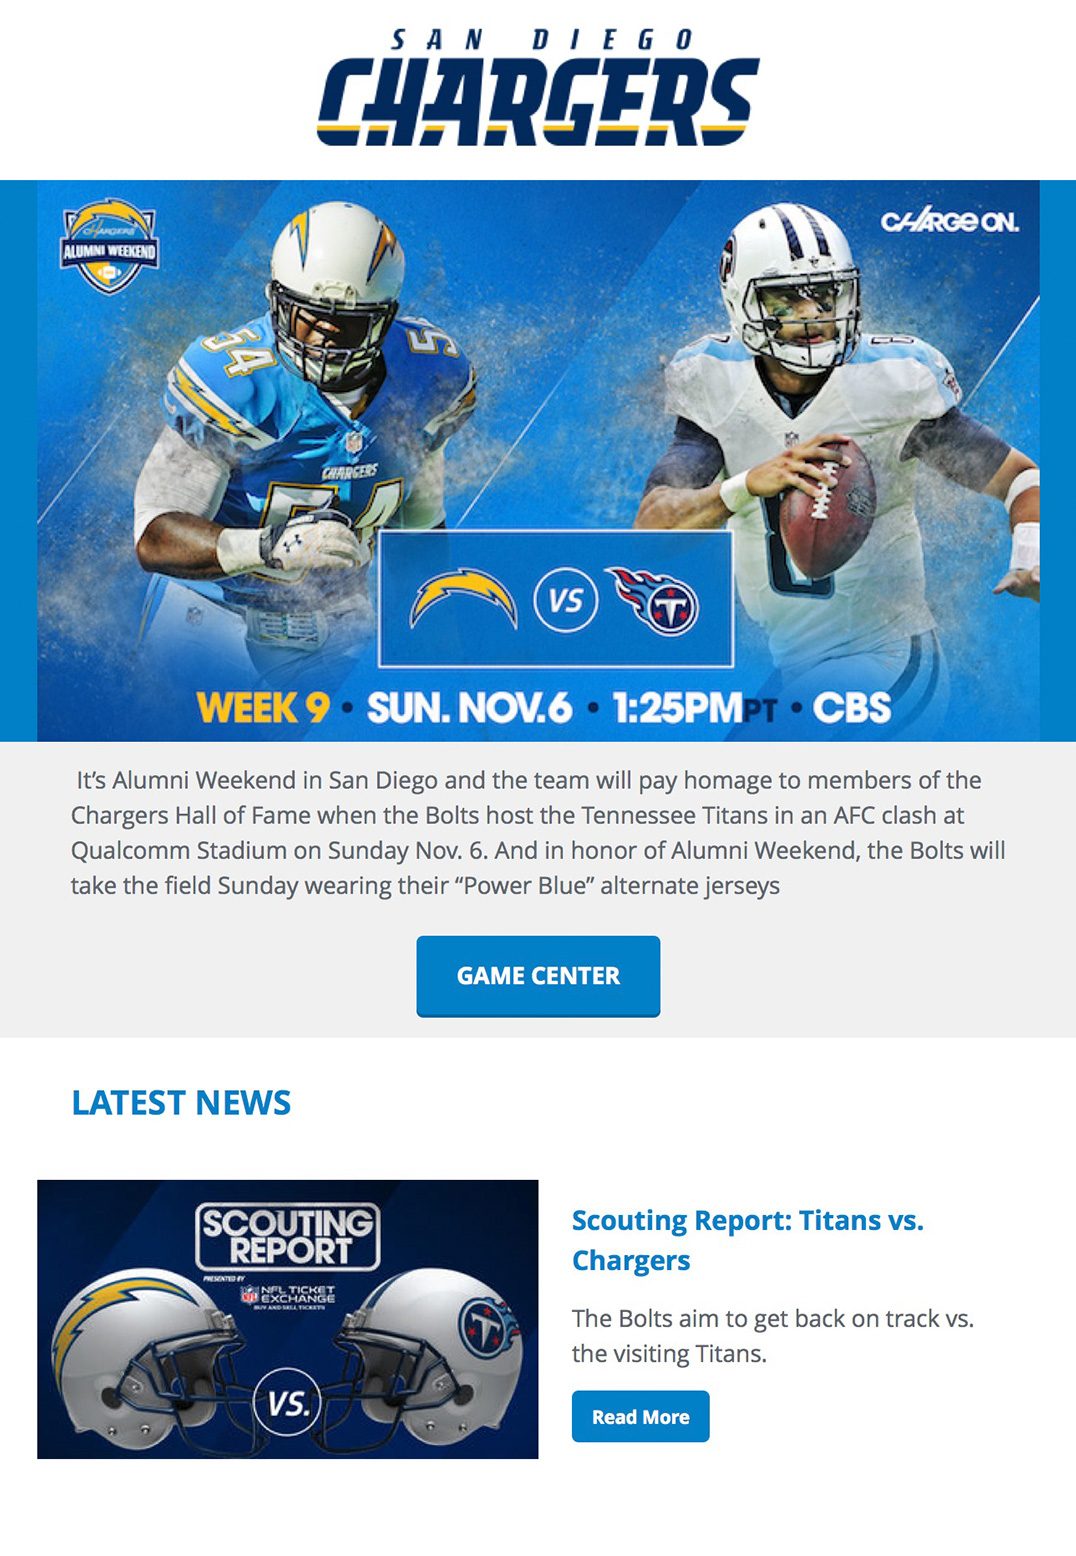 Newsletter email from the San Diego Chargers